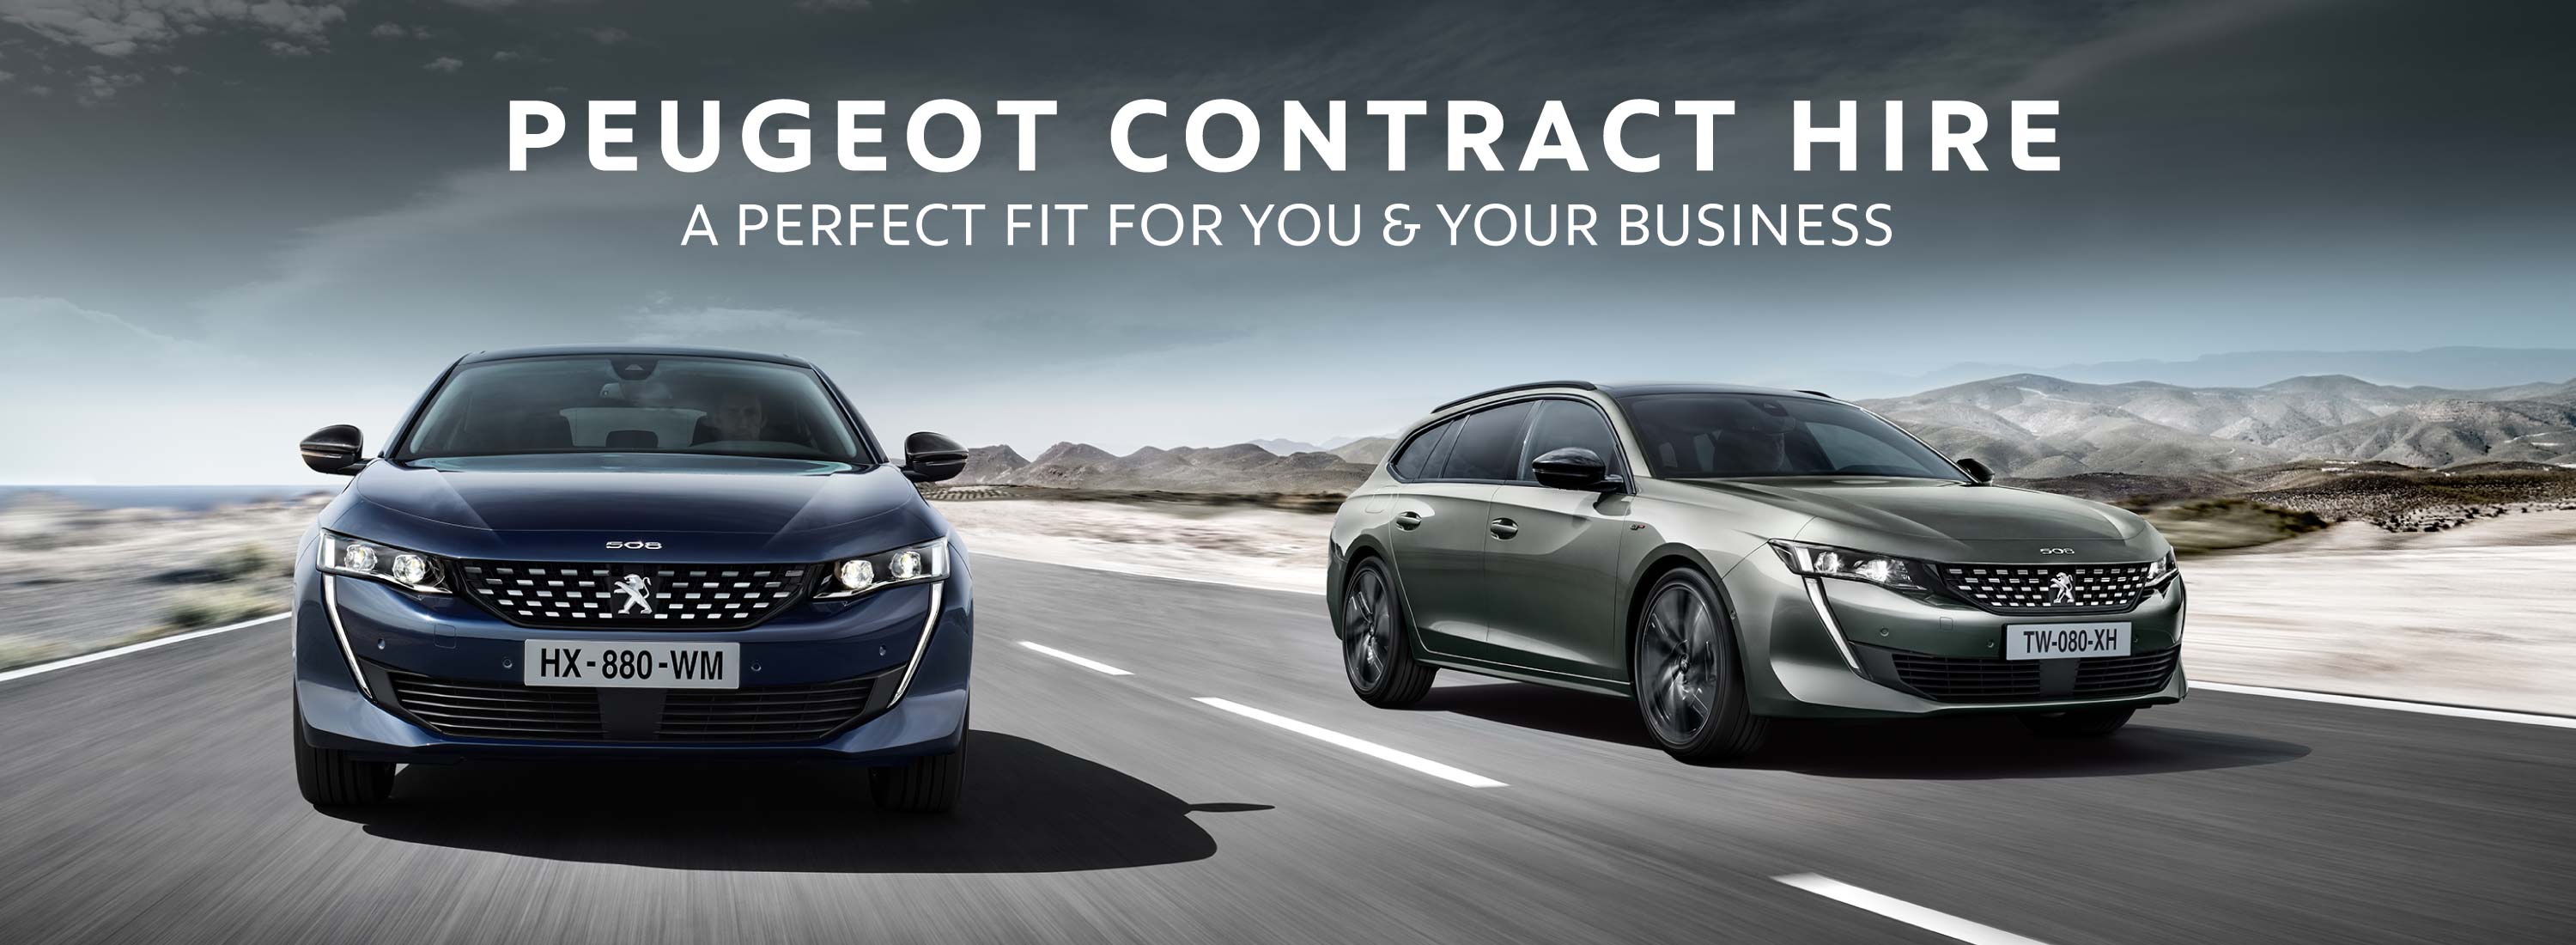 Peugeot Contract Hire BB